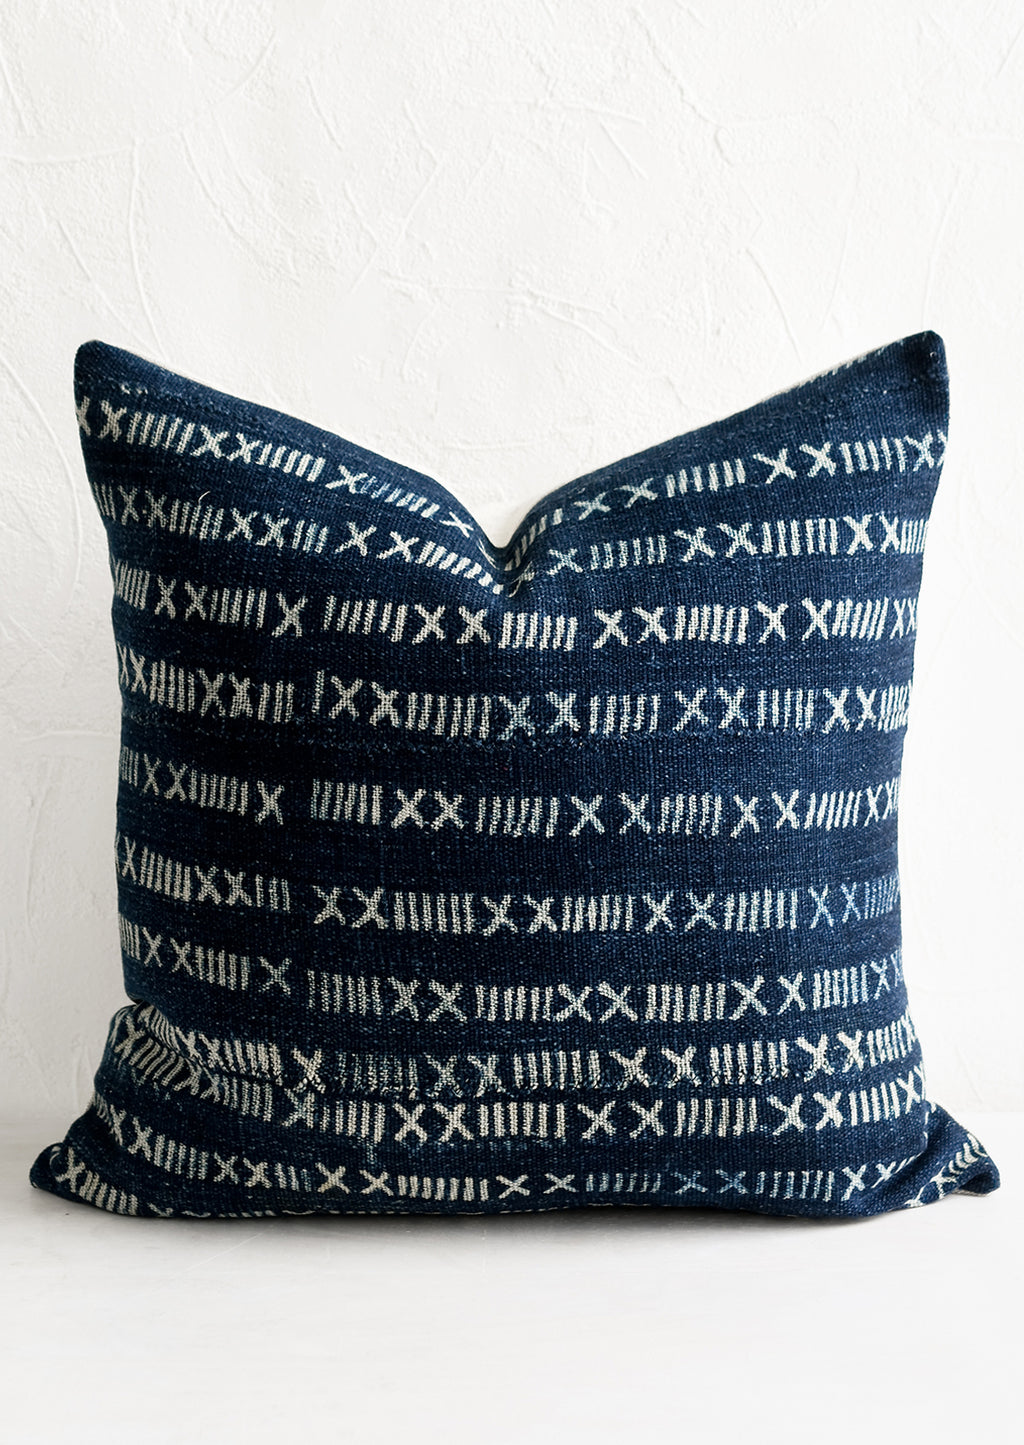 1: A throw pillow in indigo fabric with numeral pattern.